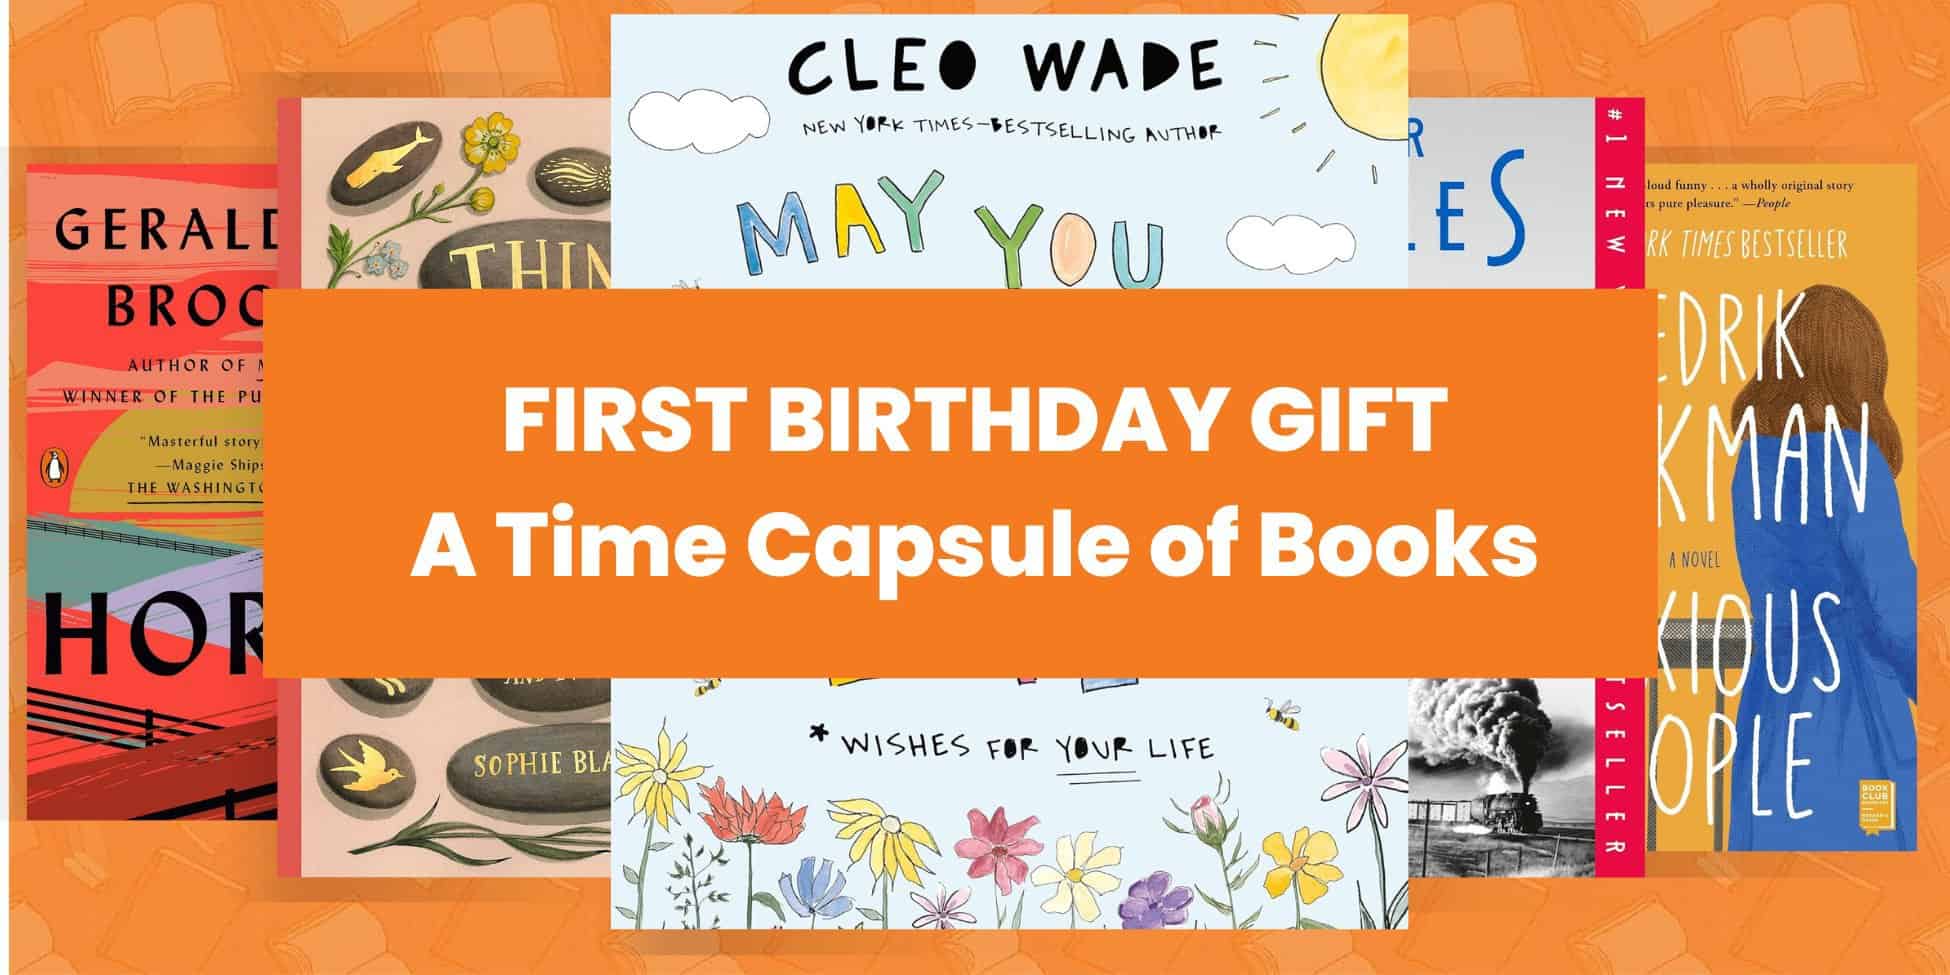 First Birthday Gift: A Time Capsule of Books!